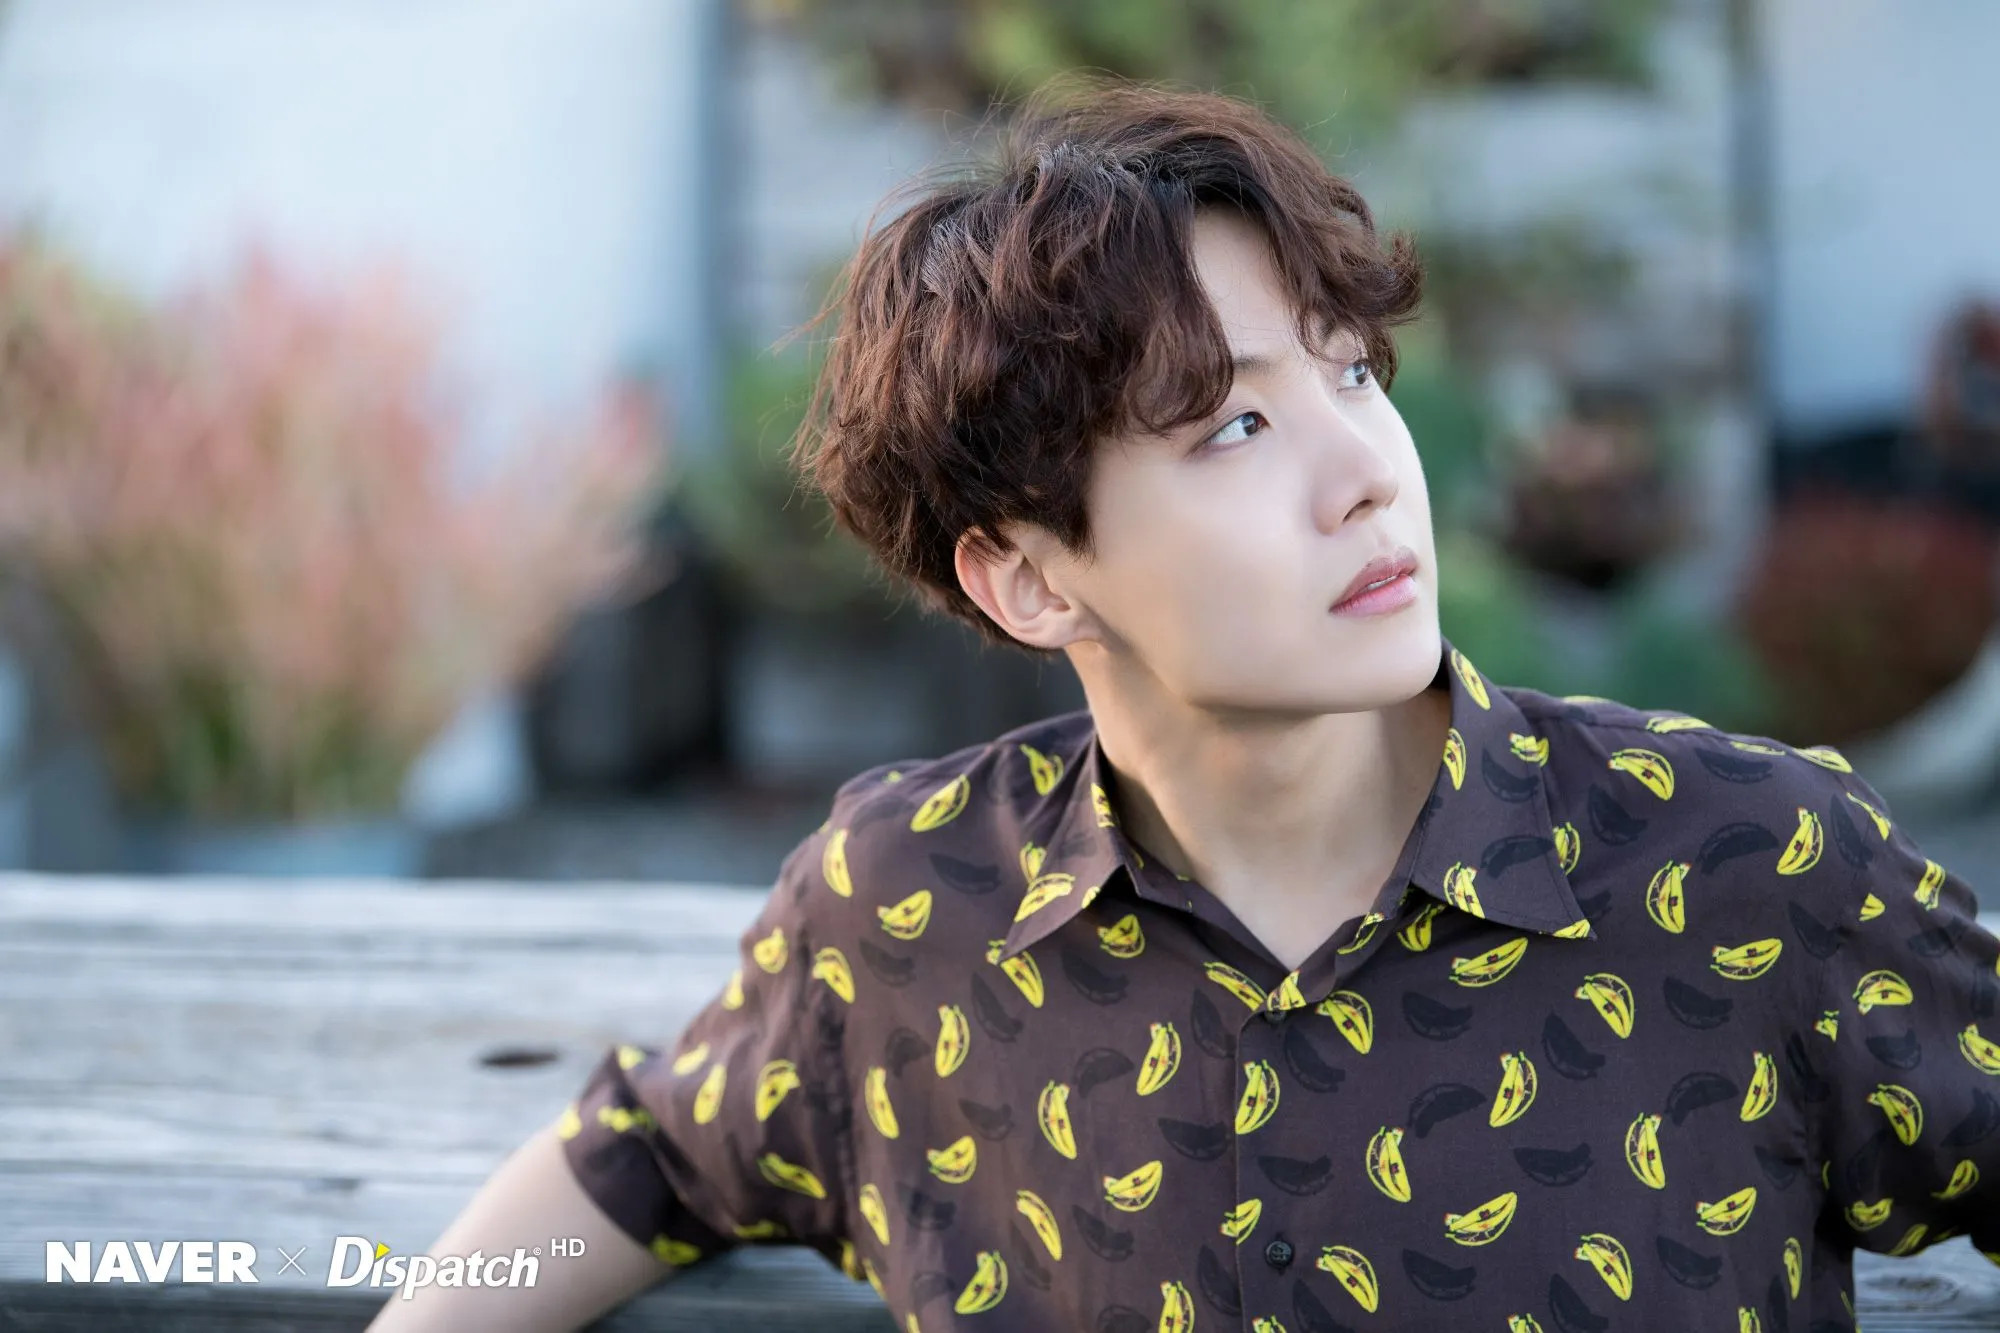 NAVER x DISPATCH ] BTS' J-Hope Christmas Pictures (181130), 181224